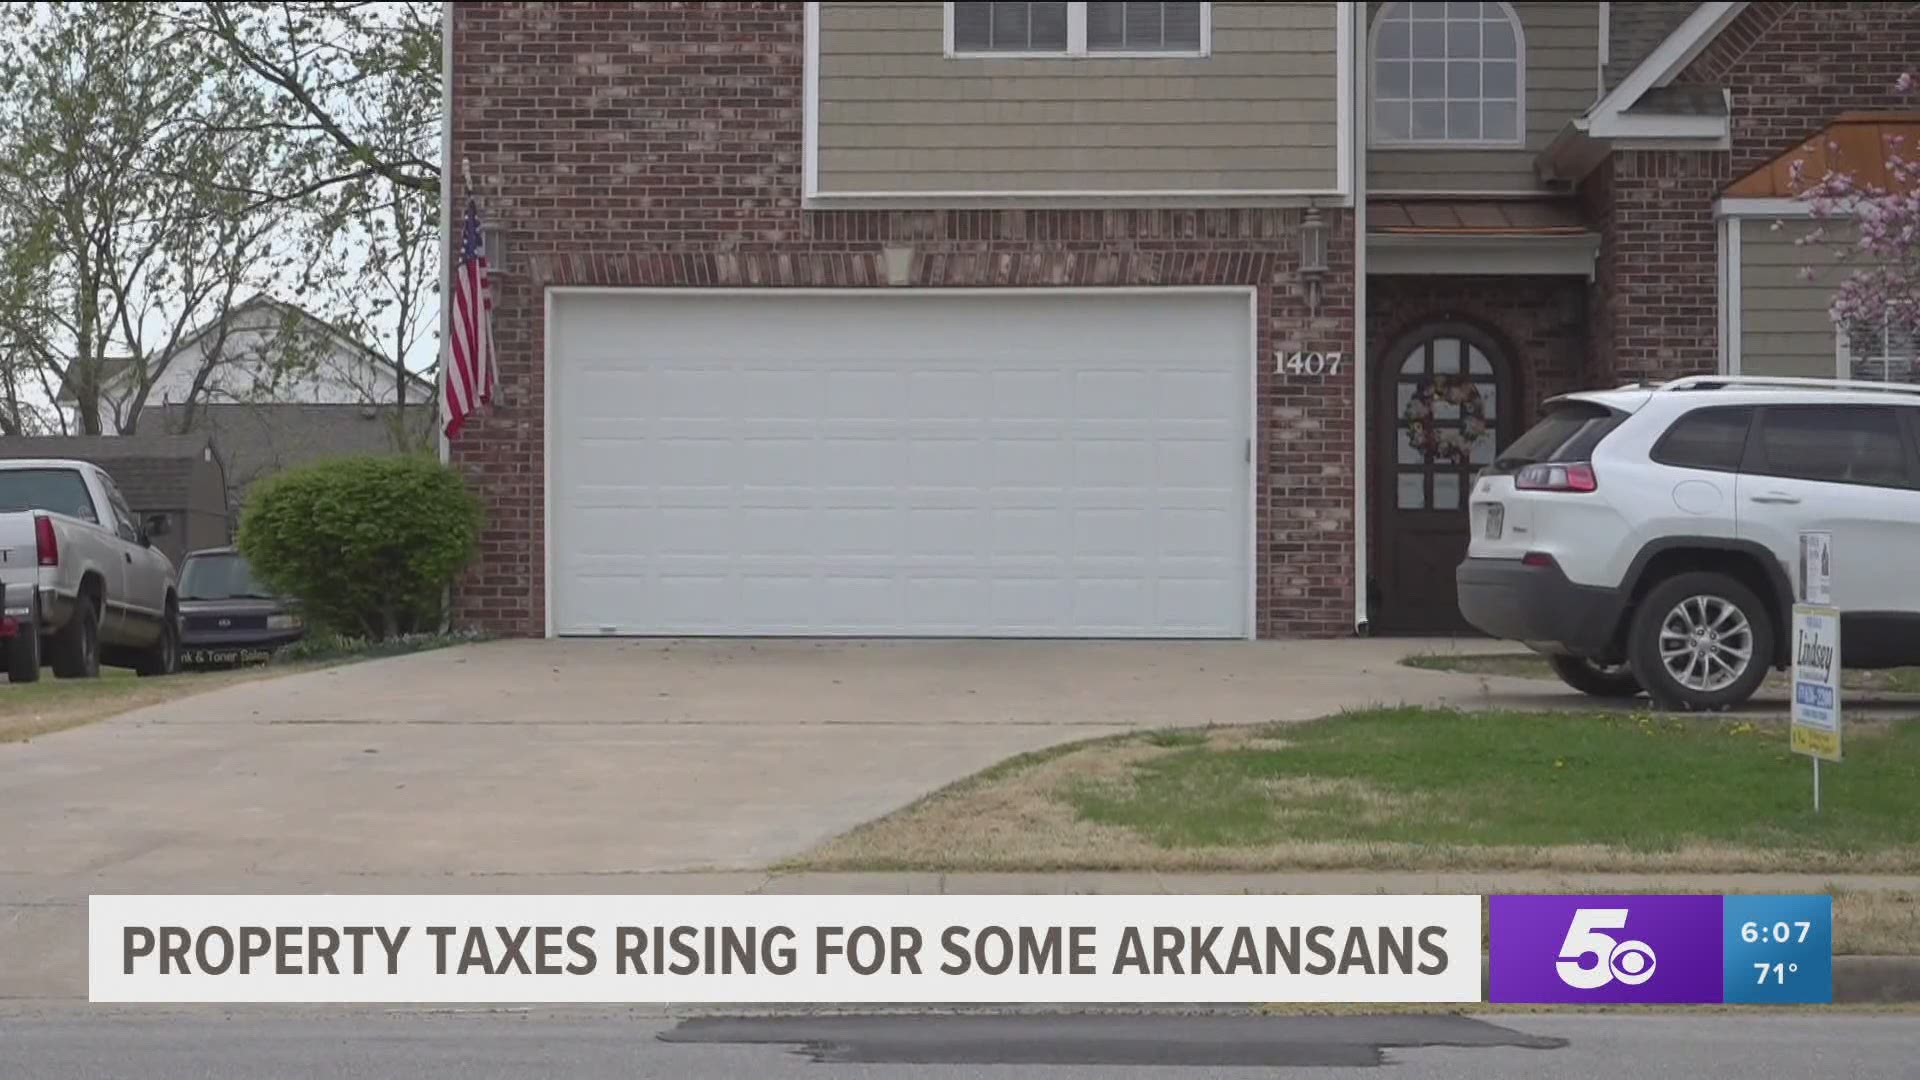 Many homeowners in NWA are receiving property tax bills higher than ever.